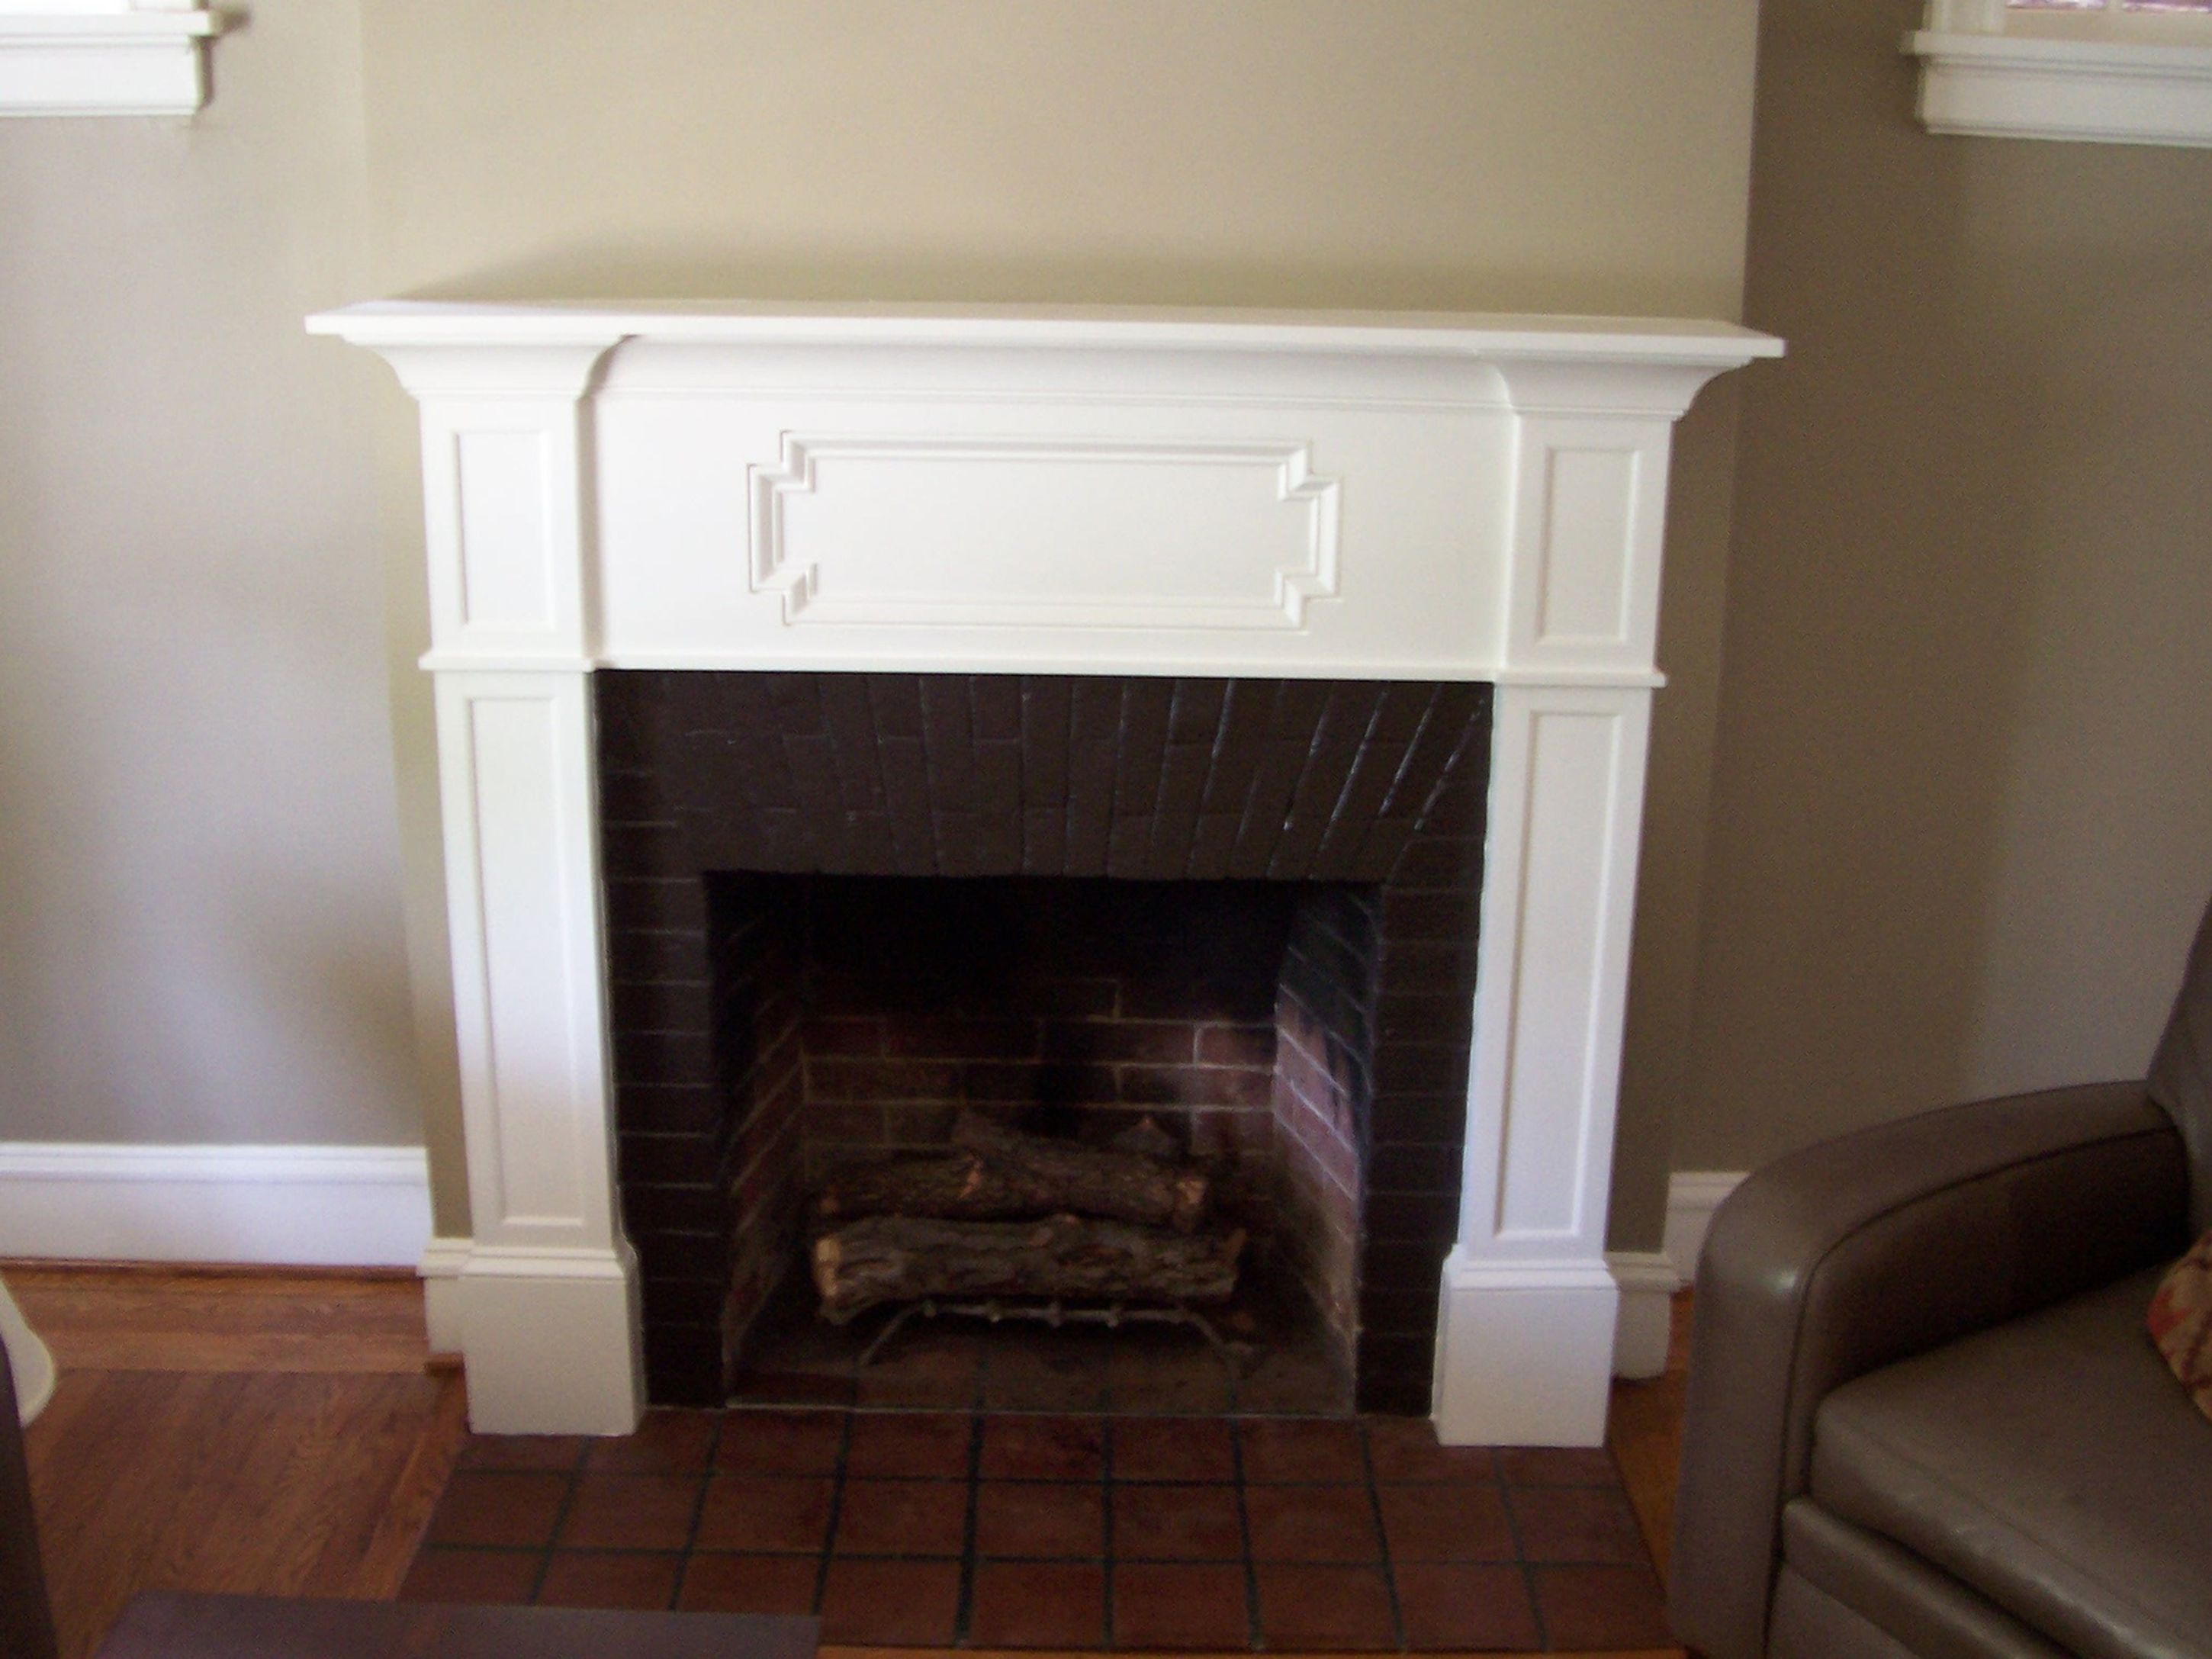 Romantic White Fireplace Mantel Design Inspiration With Black Fireplace Gray Wall And Brown Hardwood Floor Tile Nice Fireplace Mantel Design Inspiration (View 5 of 39)